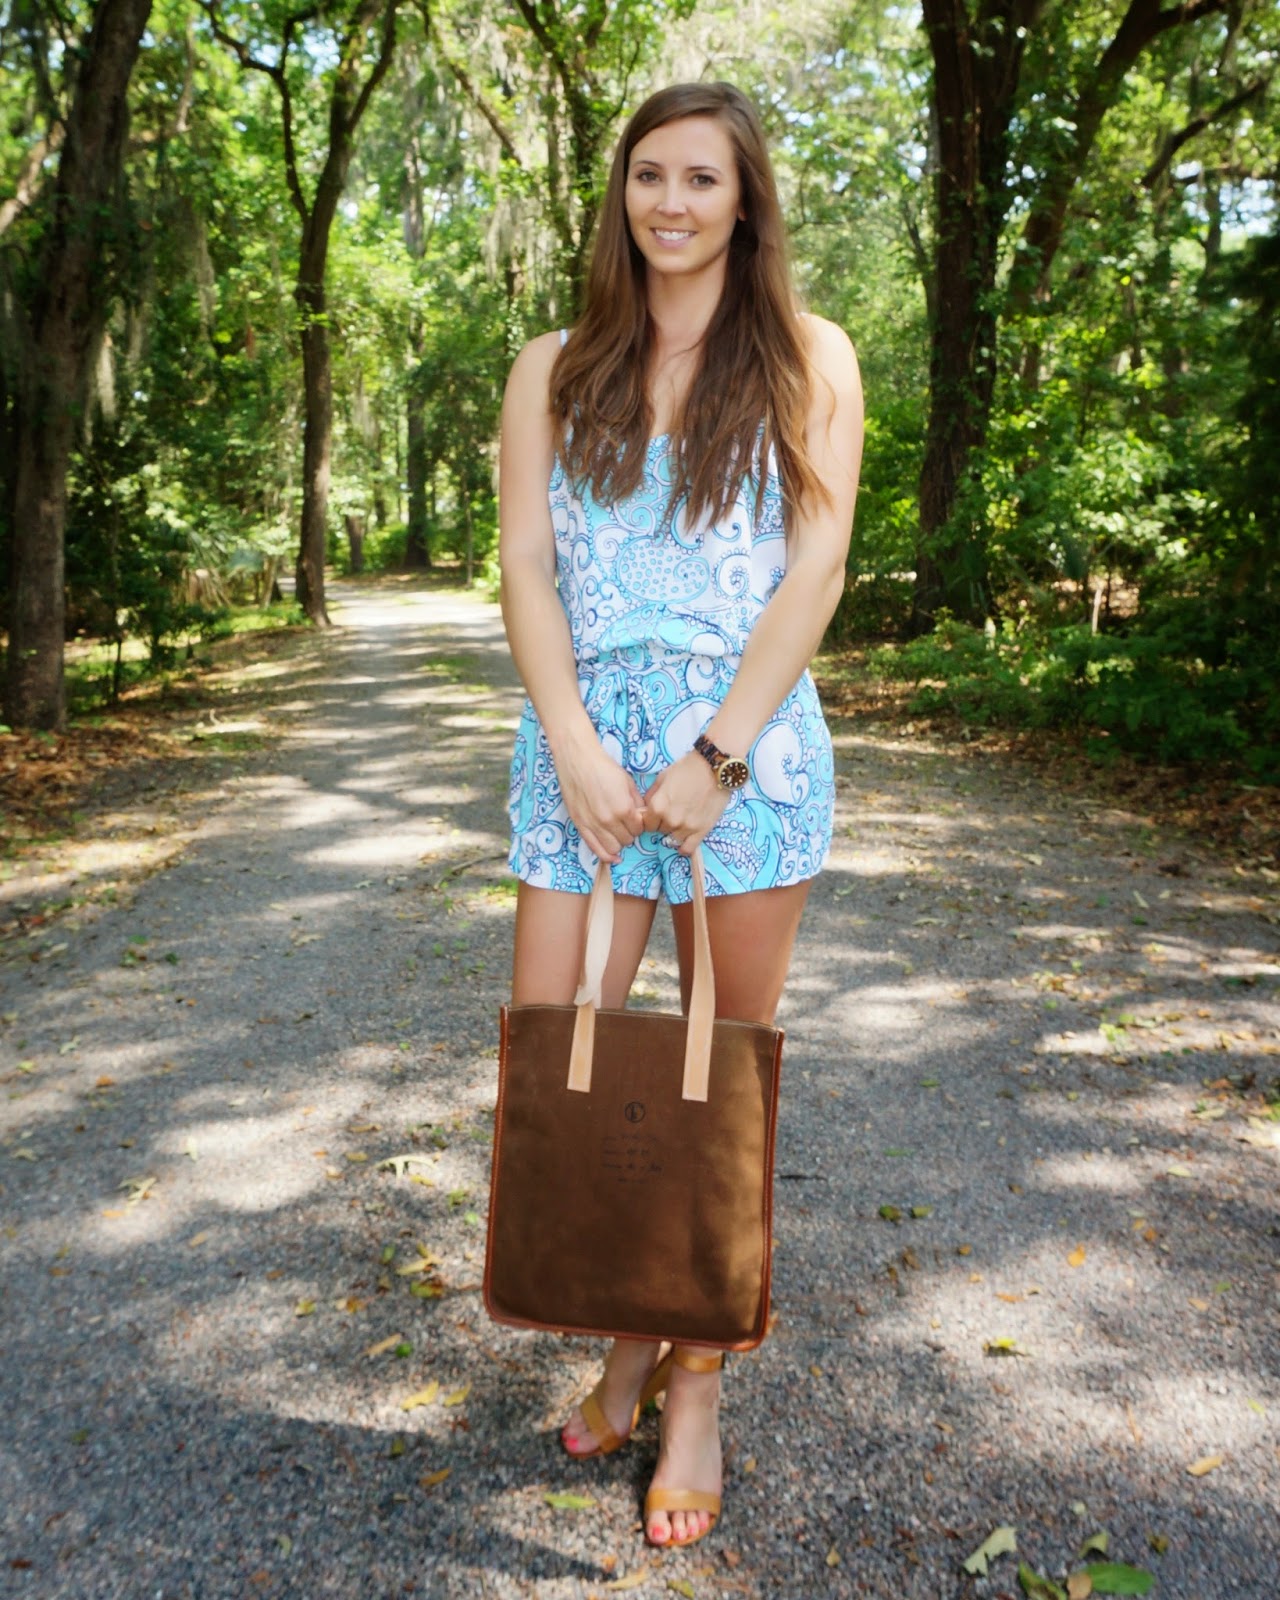 With Pearls & a Stethoscope | Lilly Pulitzer Deanna Tank Romper Playsuit & Flea bag woodland Milk tote